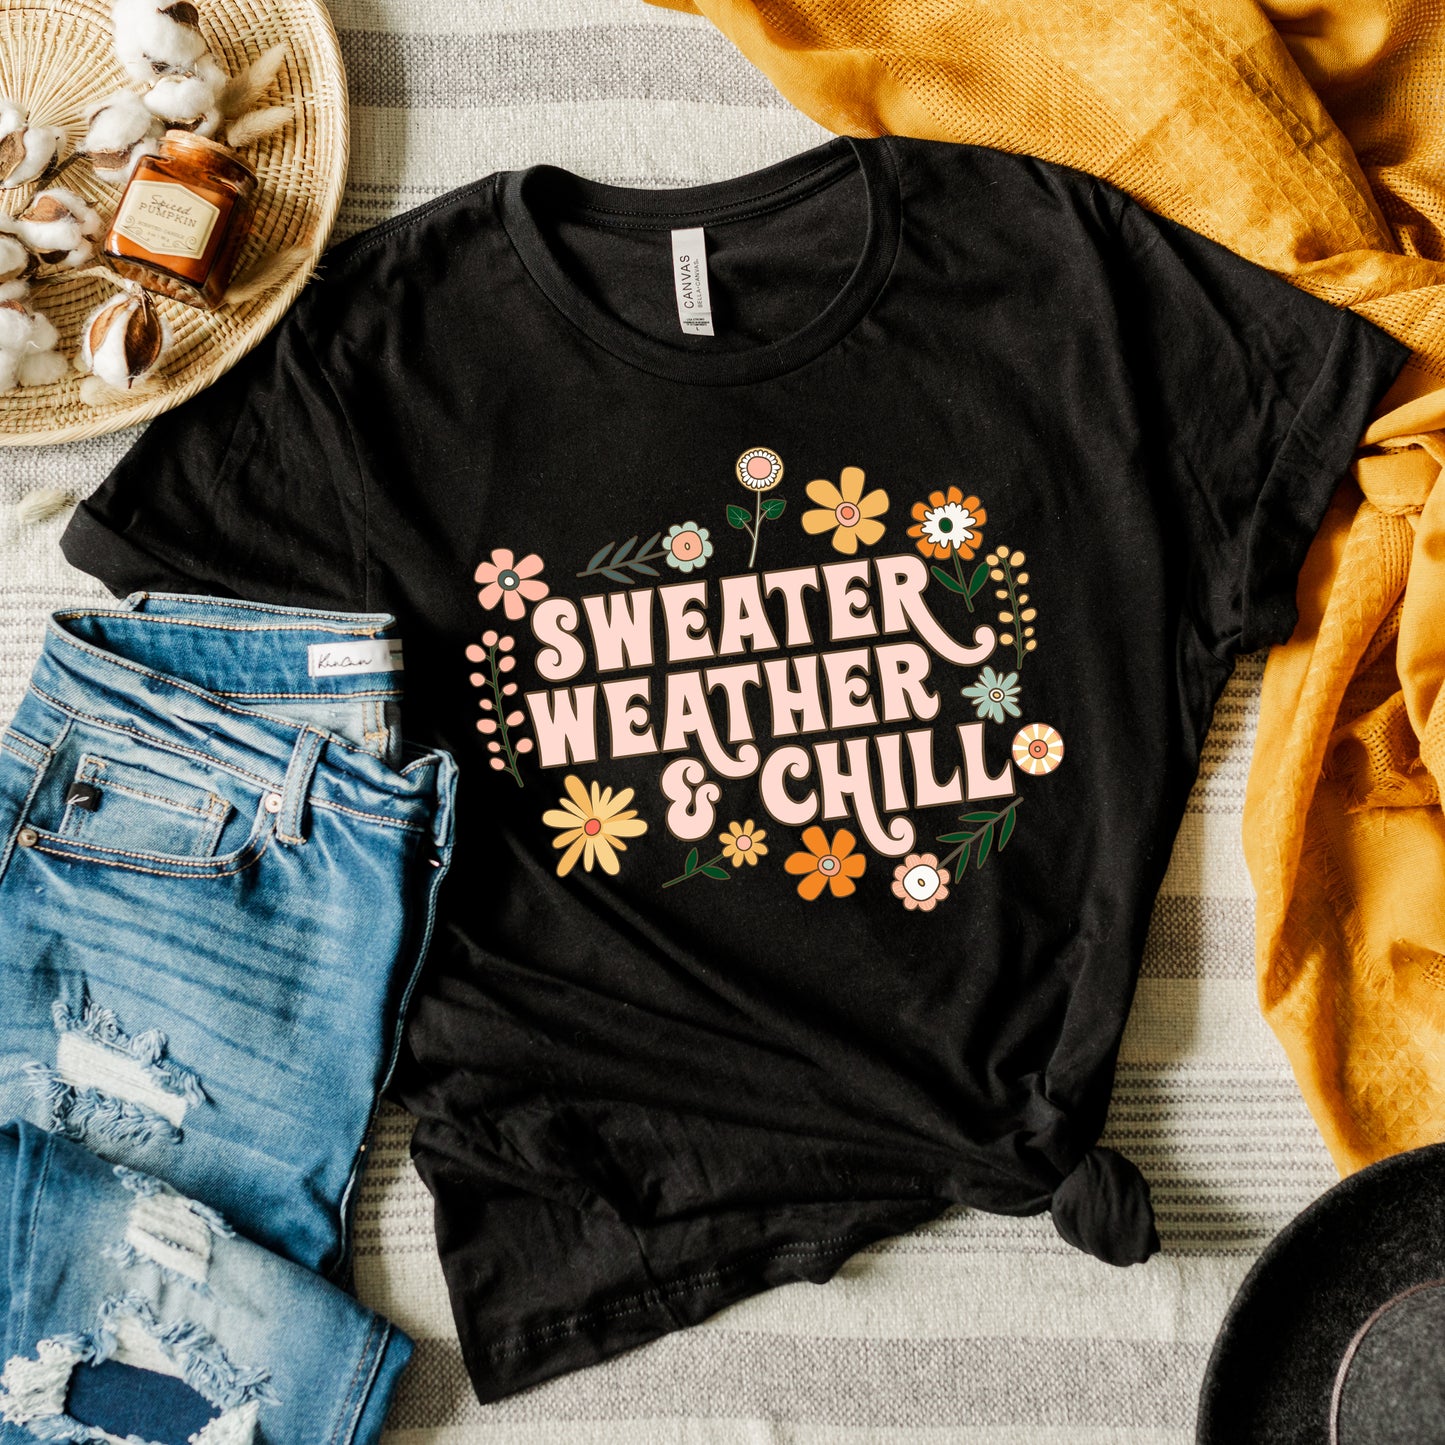 Sweater Weather and Chill | Short Sleeve Crew Neck